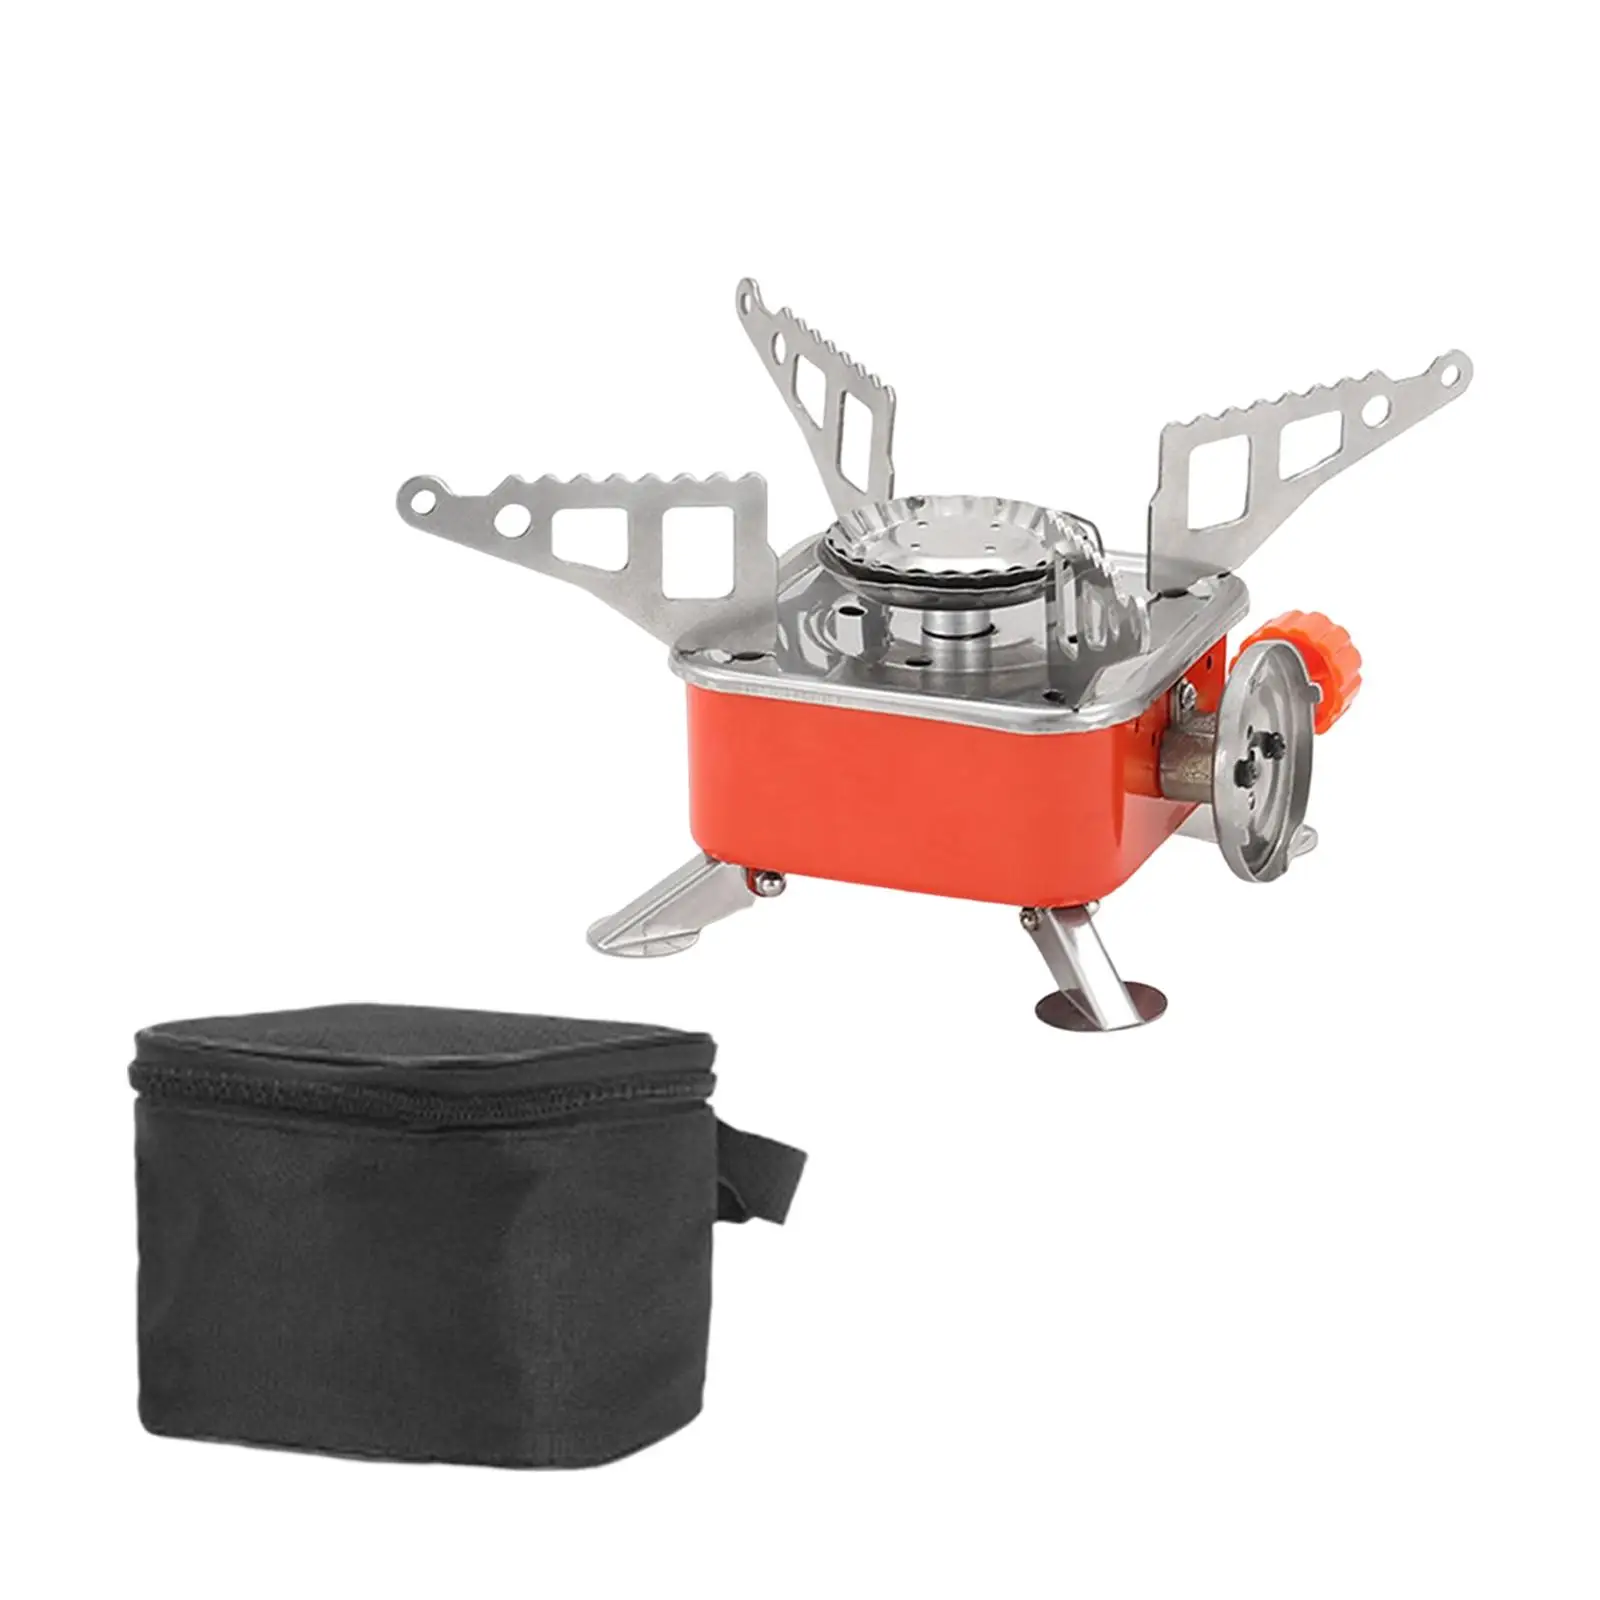 Camping Gas Stove with Storage Case, Camp Stove for Backpacking Fishing Outdoor Picnic Hiking